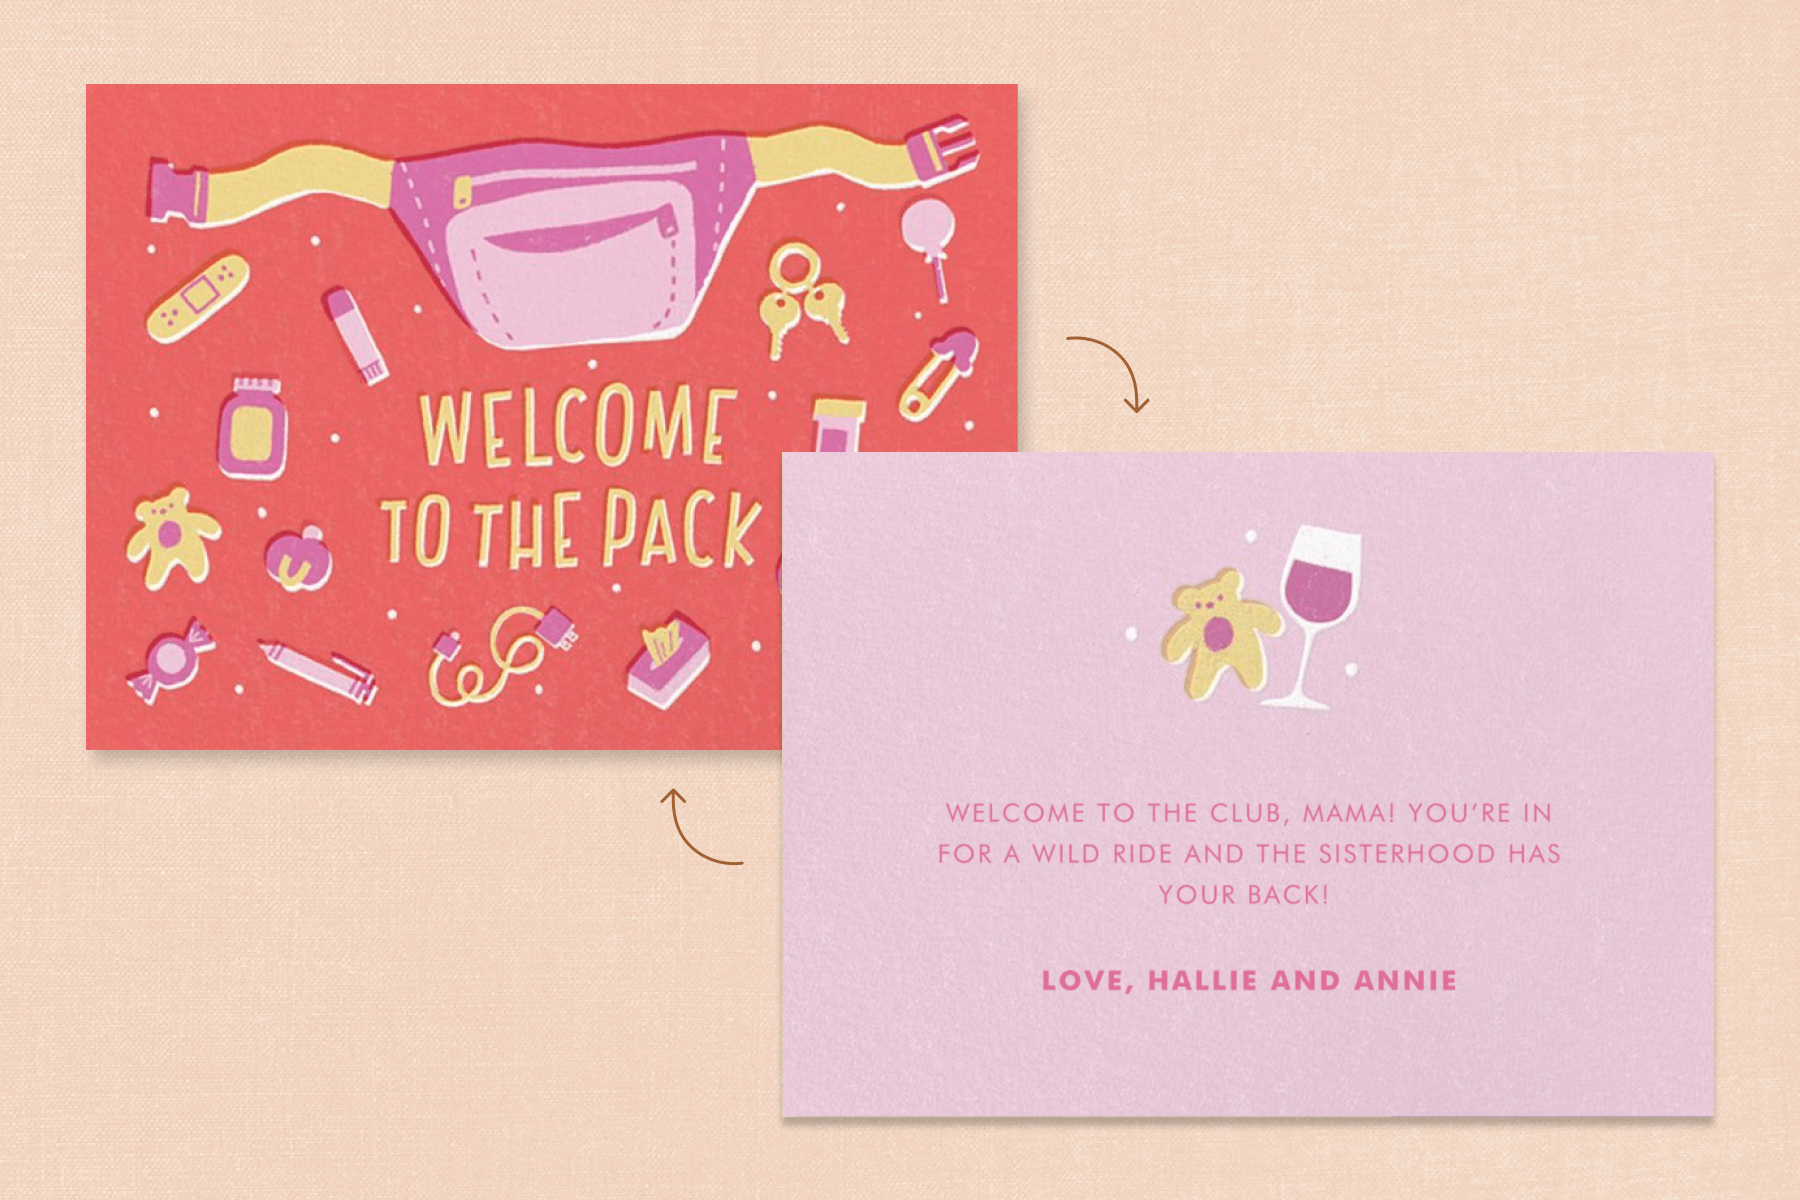 An illustrated Mother’s Day card showing one of the messages suggested below. The card reads “Welcome to the pack.”